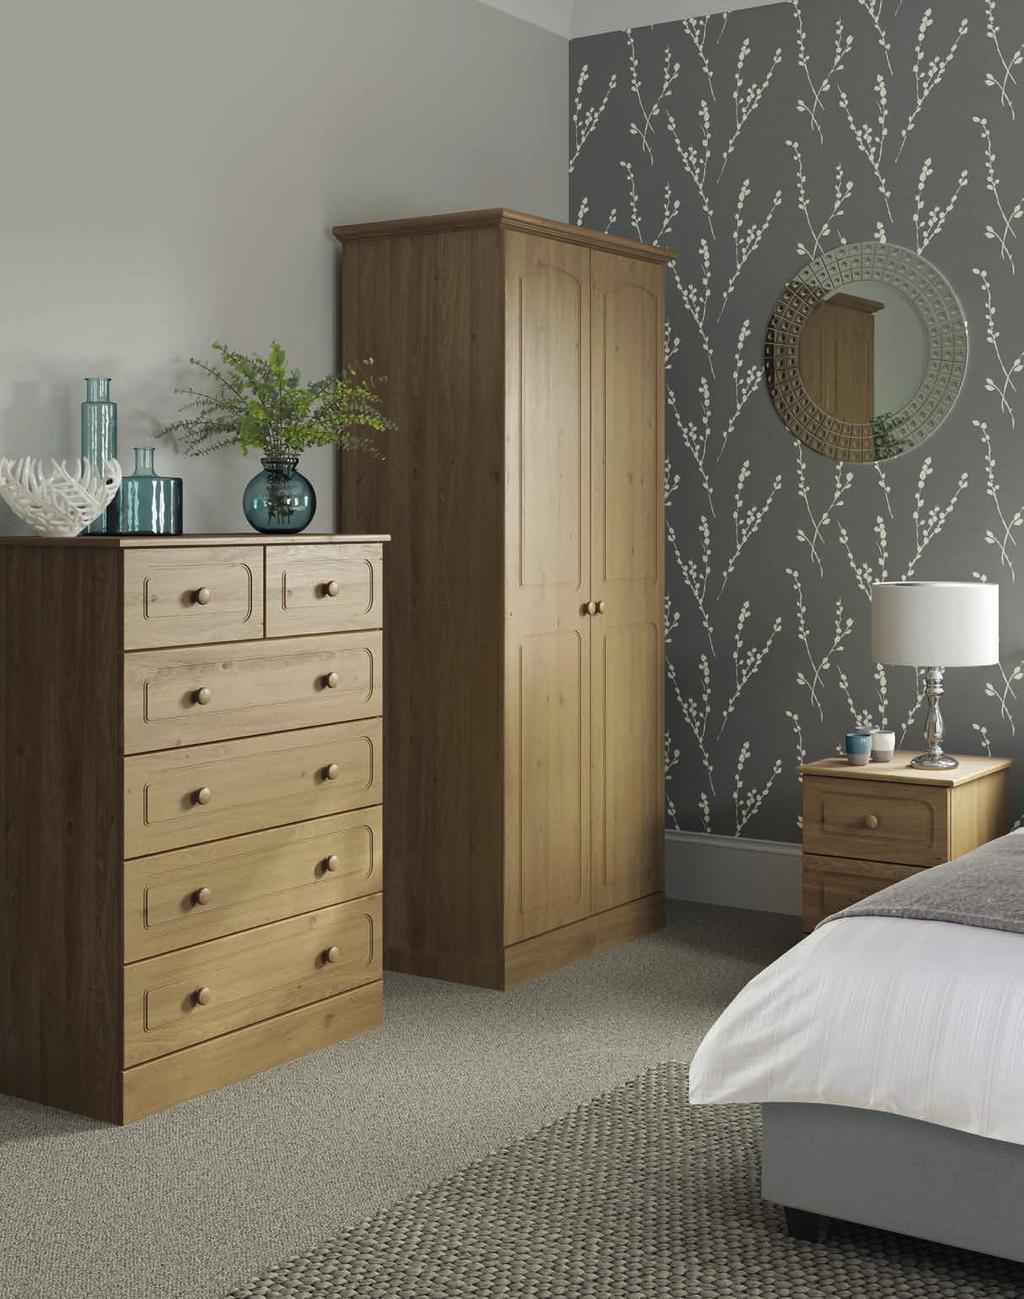 AYLESBURY KINGSTOWN 47 AYLESBURY classic THIS easy LOOKING RANGE IS ON eye. THE This classic range of bedroom furniture is suited to any bedroom and is equipped with ample storage space.